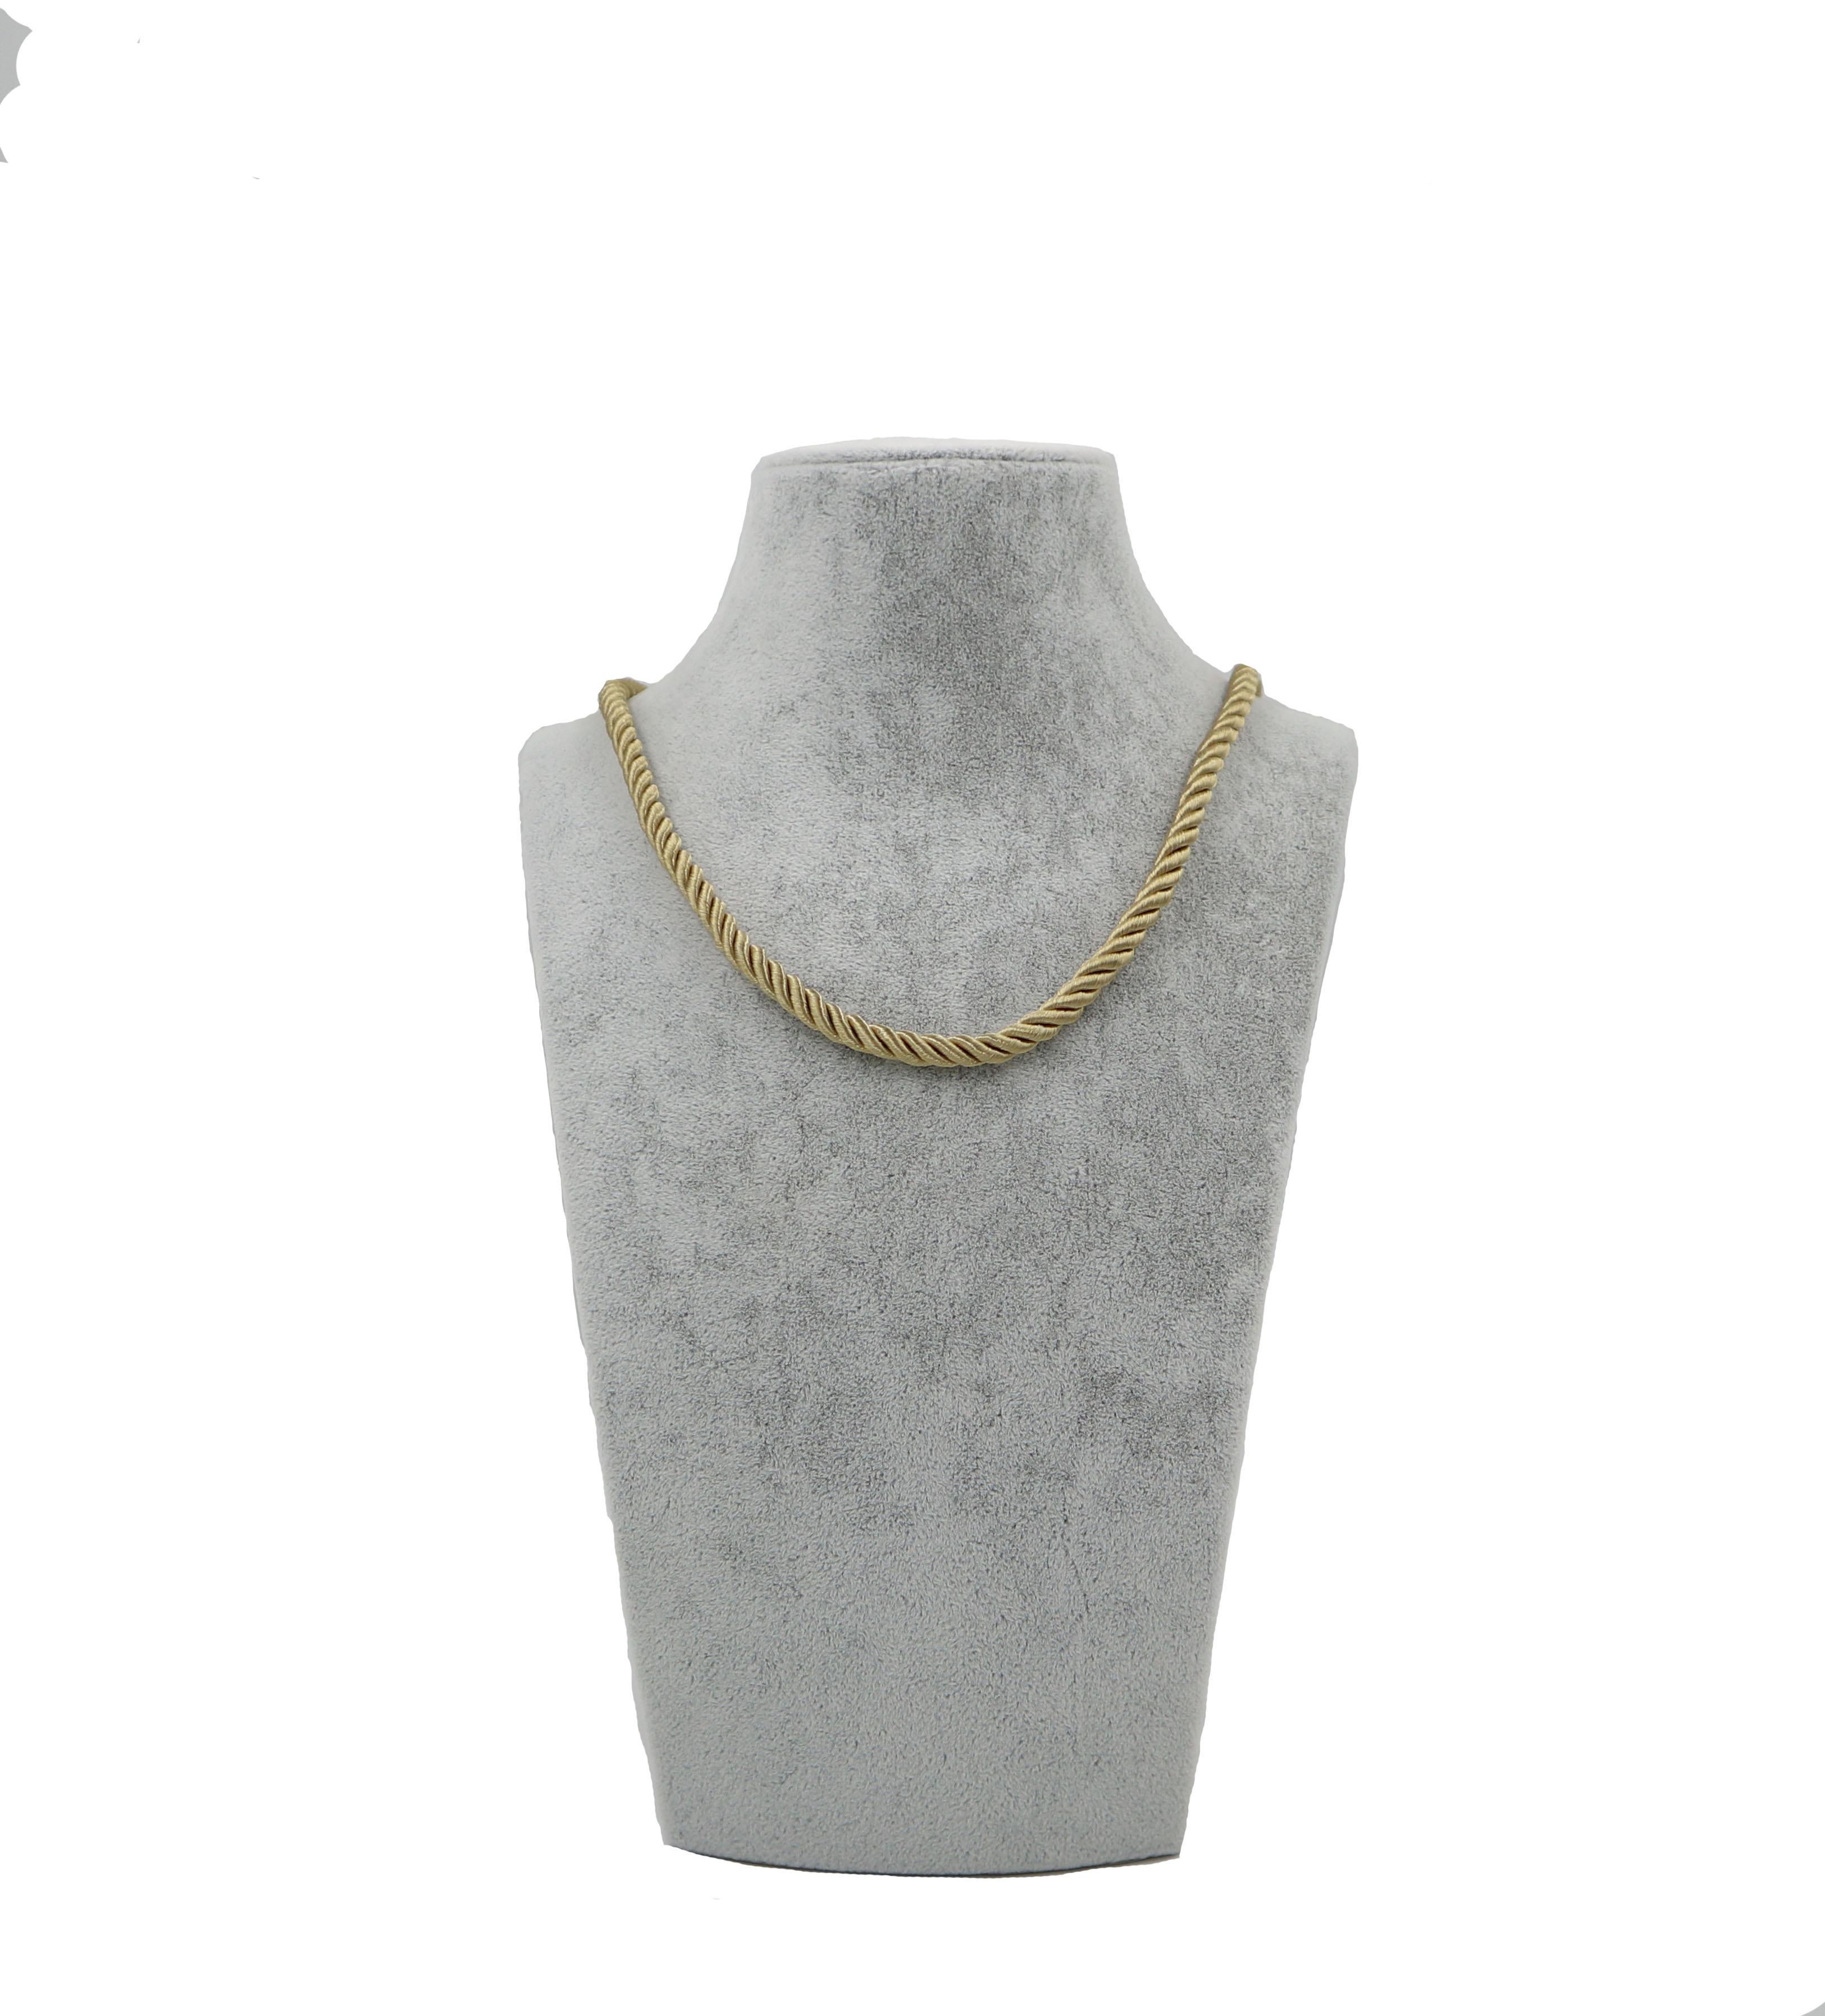 silk cord necklace with gold clasp